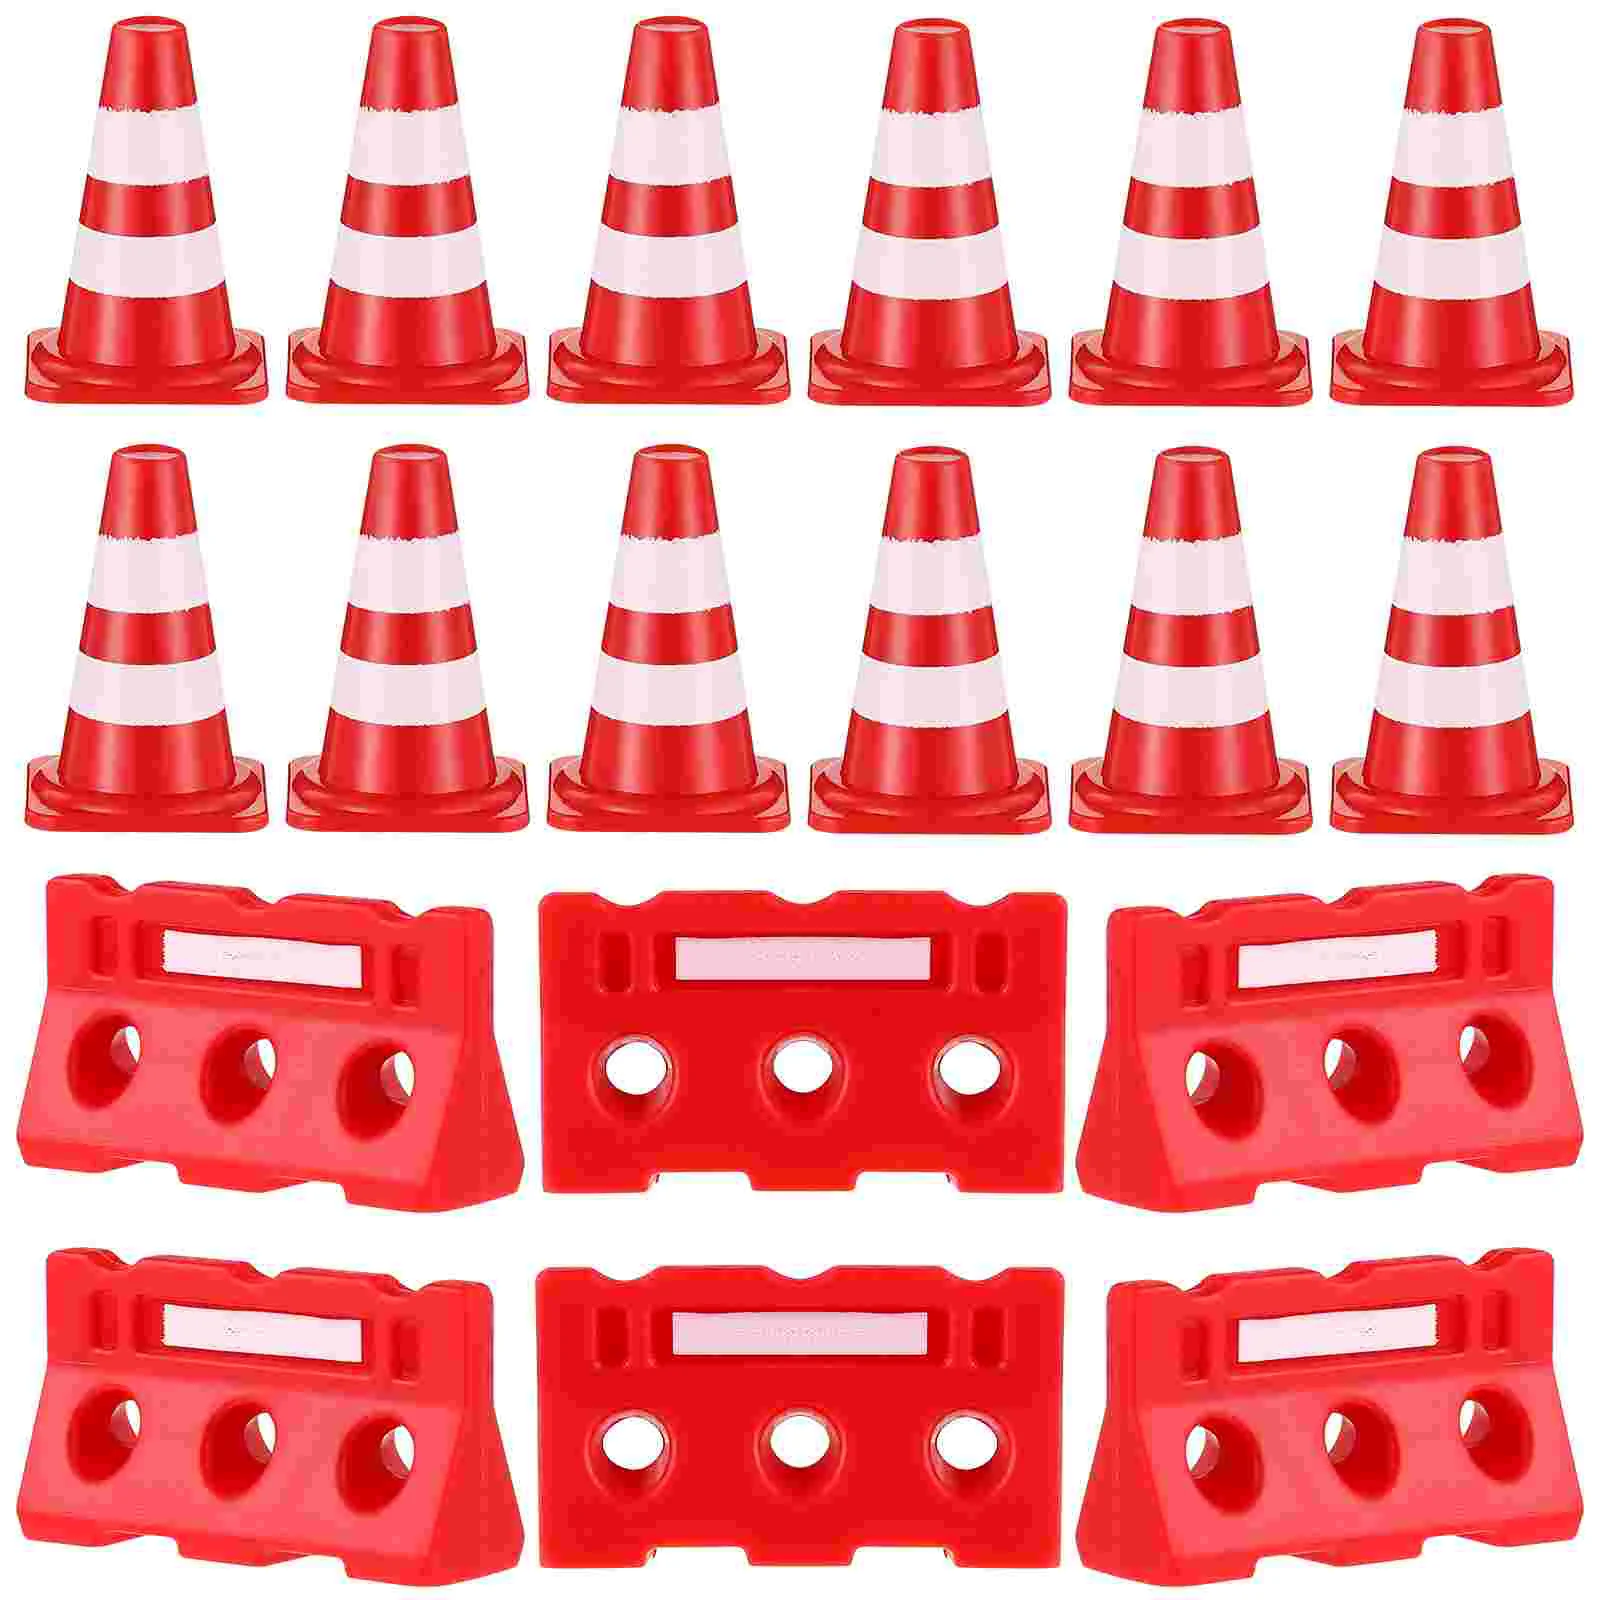 

24 Pcs Road Sign Barricade Toy Mini Traffic Cones DIY Ornaments Construction The Fence Signs Plastic Small Child Toys